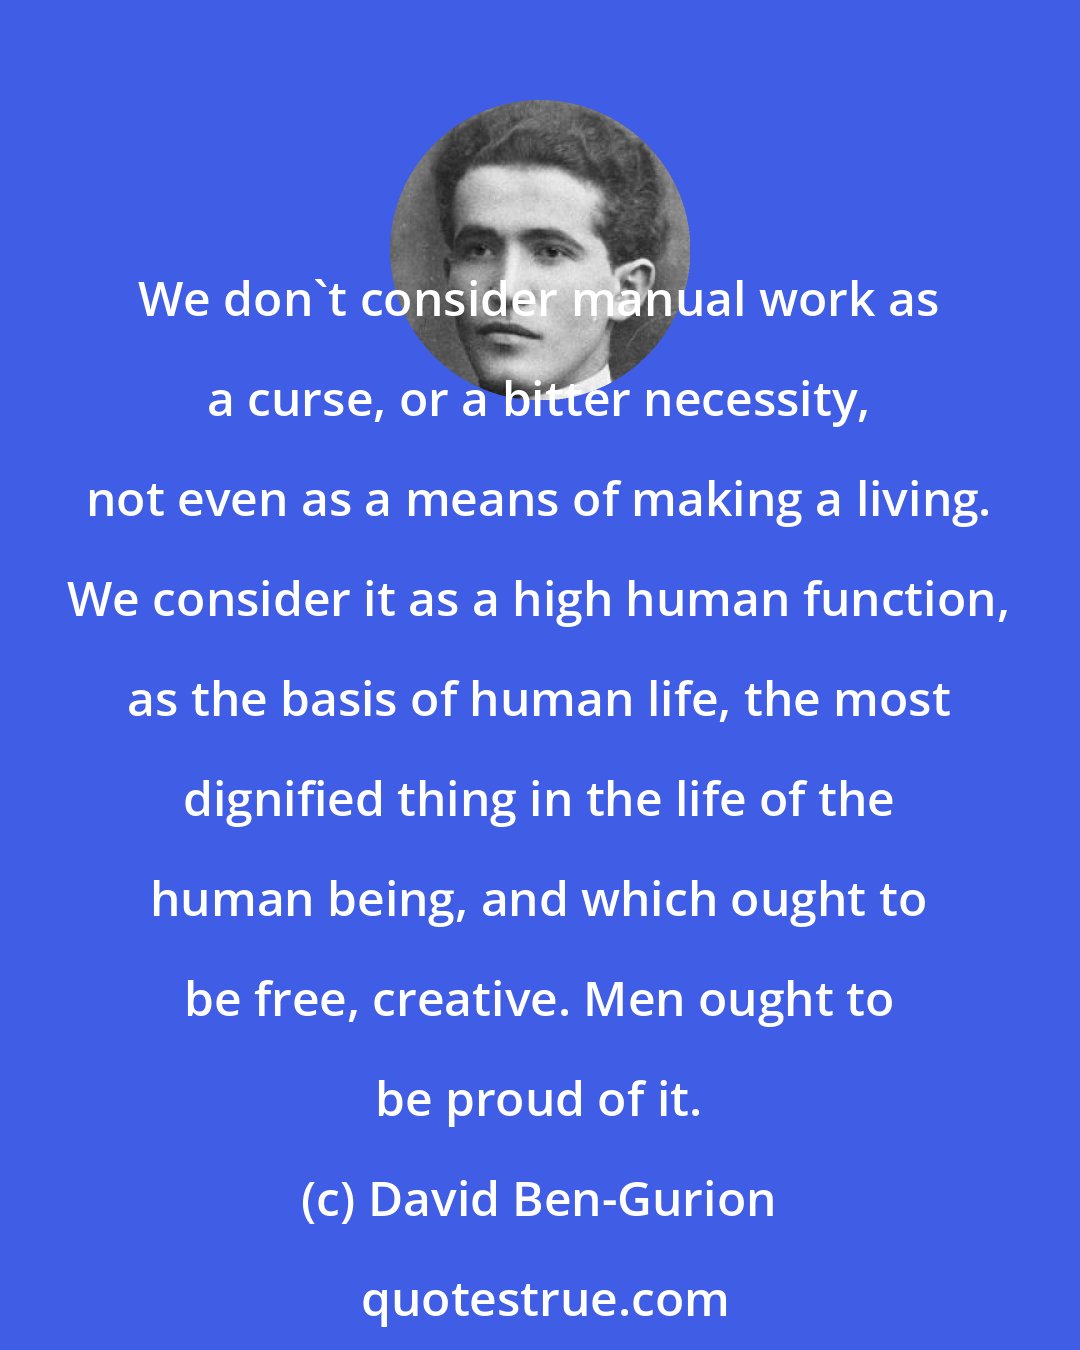 David Ben-Gurion: We don't consider manual work as a curse, or a bitter necessity, not even as a means of making a living. We consider it as a high human function, as the basis of human life, the most dignified thing in the life of the human being, and which ought to be free, creative. Men ought to be proud of it.